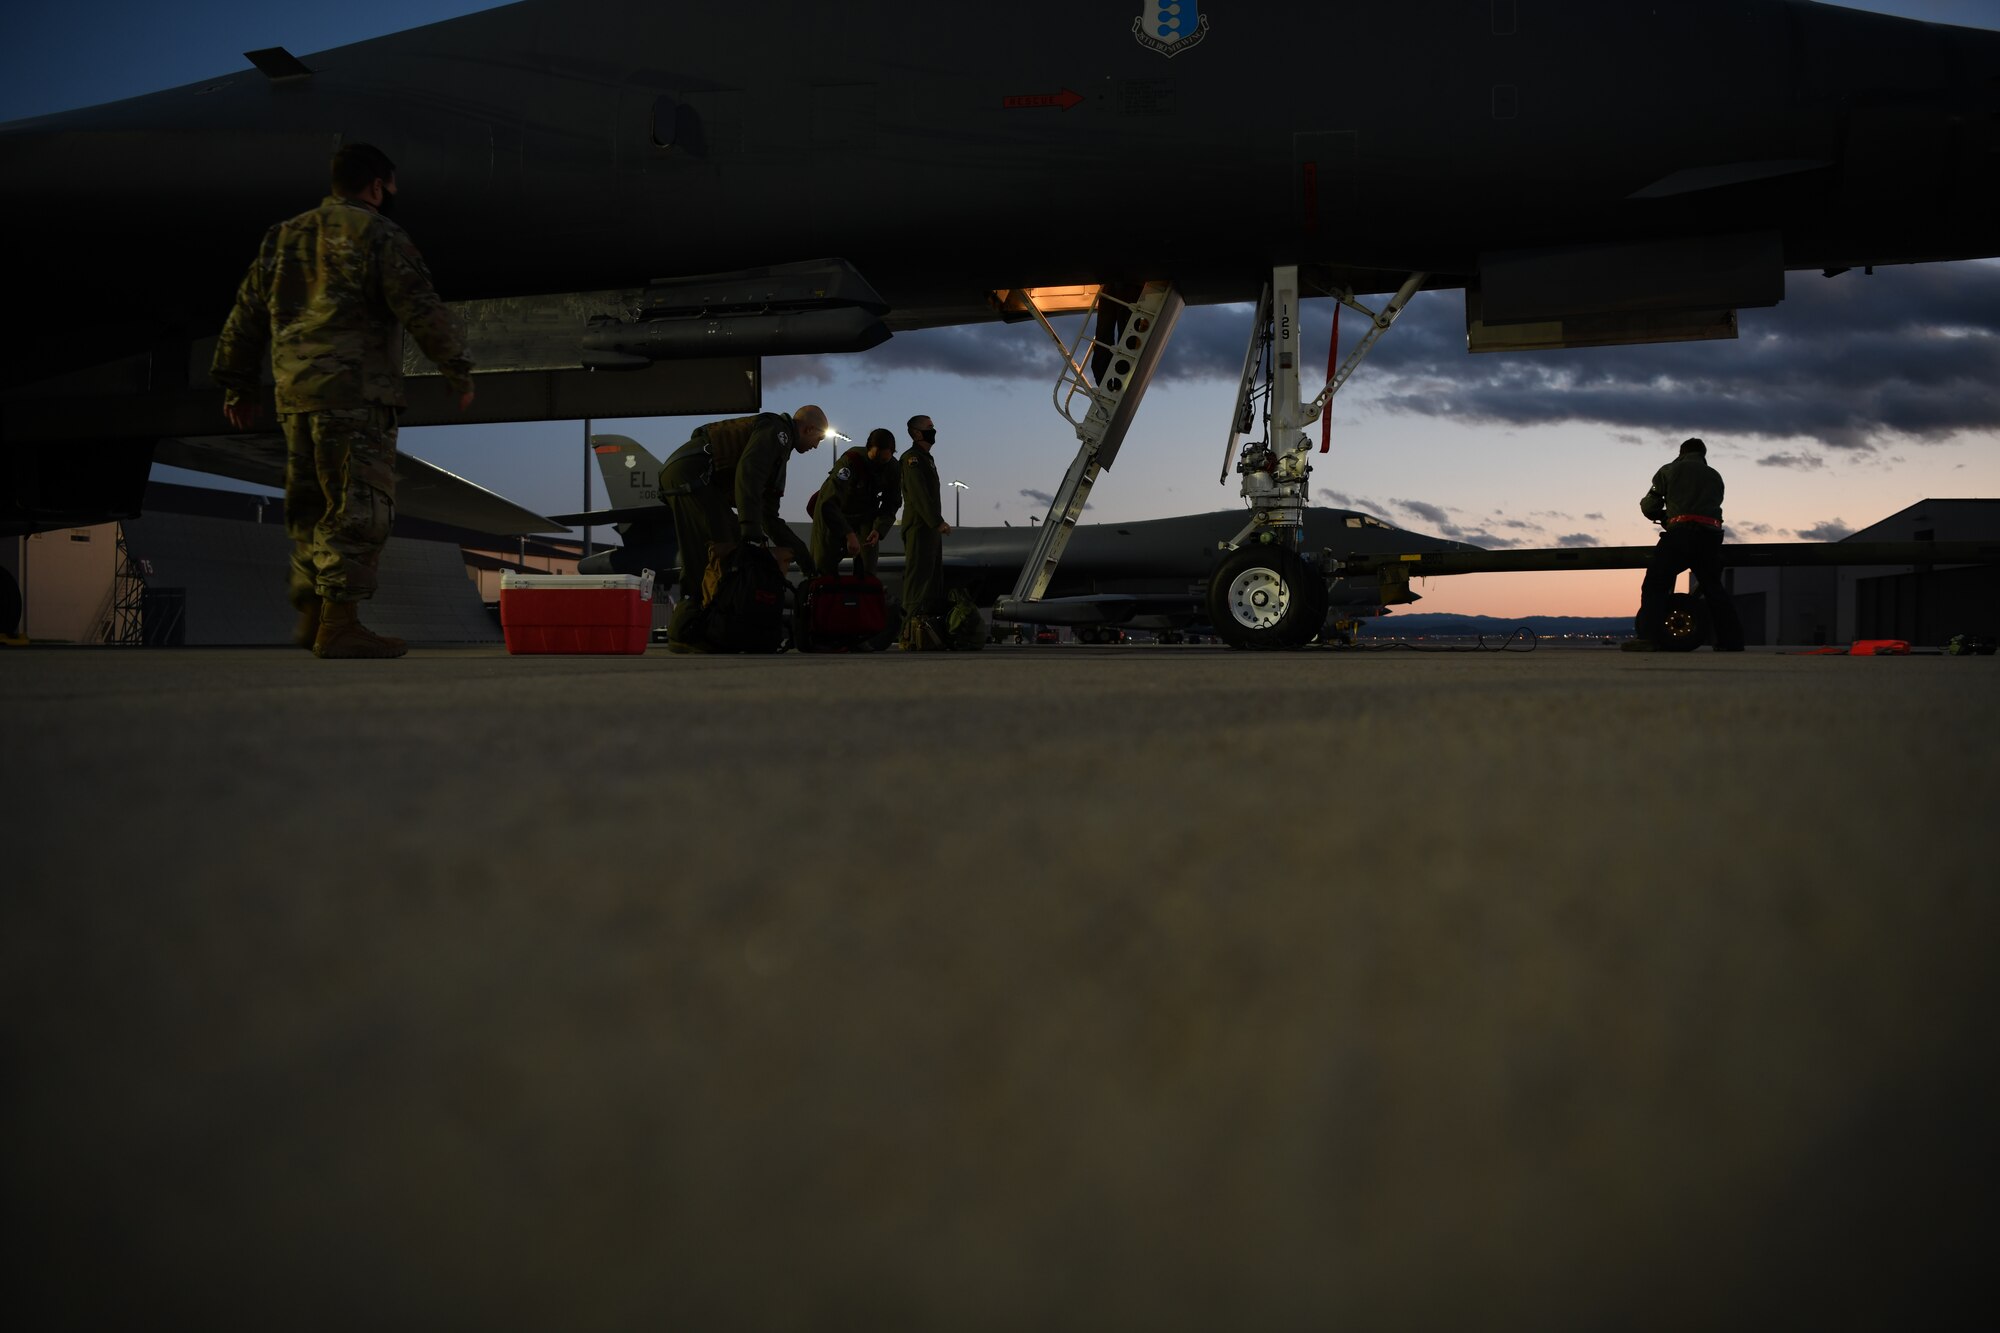 Wing leaders assist aviators assigned to the 34th Bomb Squadron unload their gear after successfully completing a more than 25-hour non-stop deployment from Ellsworth Air Force Base, S.D., May 5, 2020. During the Bomber Task Force mission to the U.S. European Command area of responsibility, B-1B Lancers integrated with NATO and allied partners for operations and activities. (U.S. Air Force photo by Senior Airman Nicolas Z. Erwin)